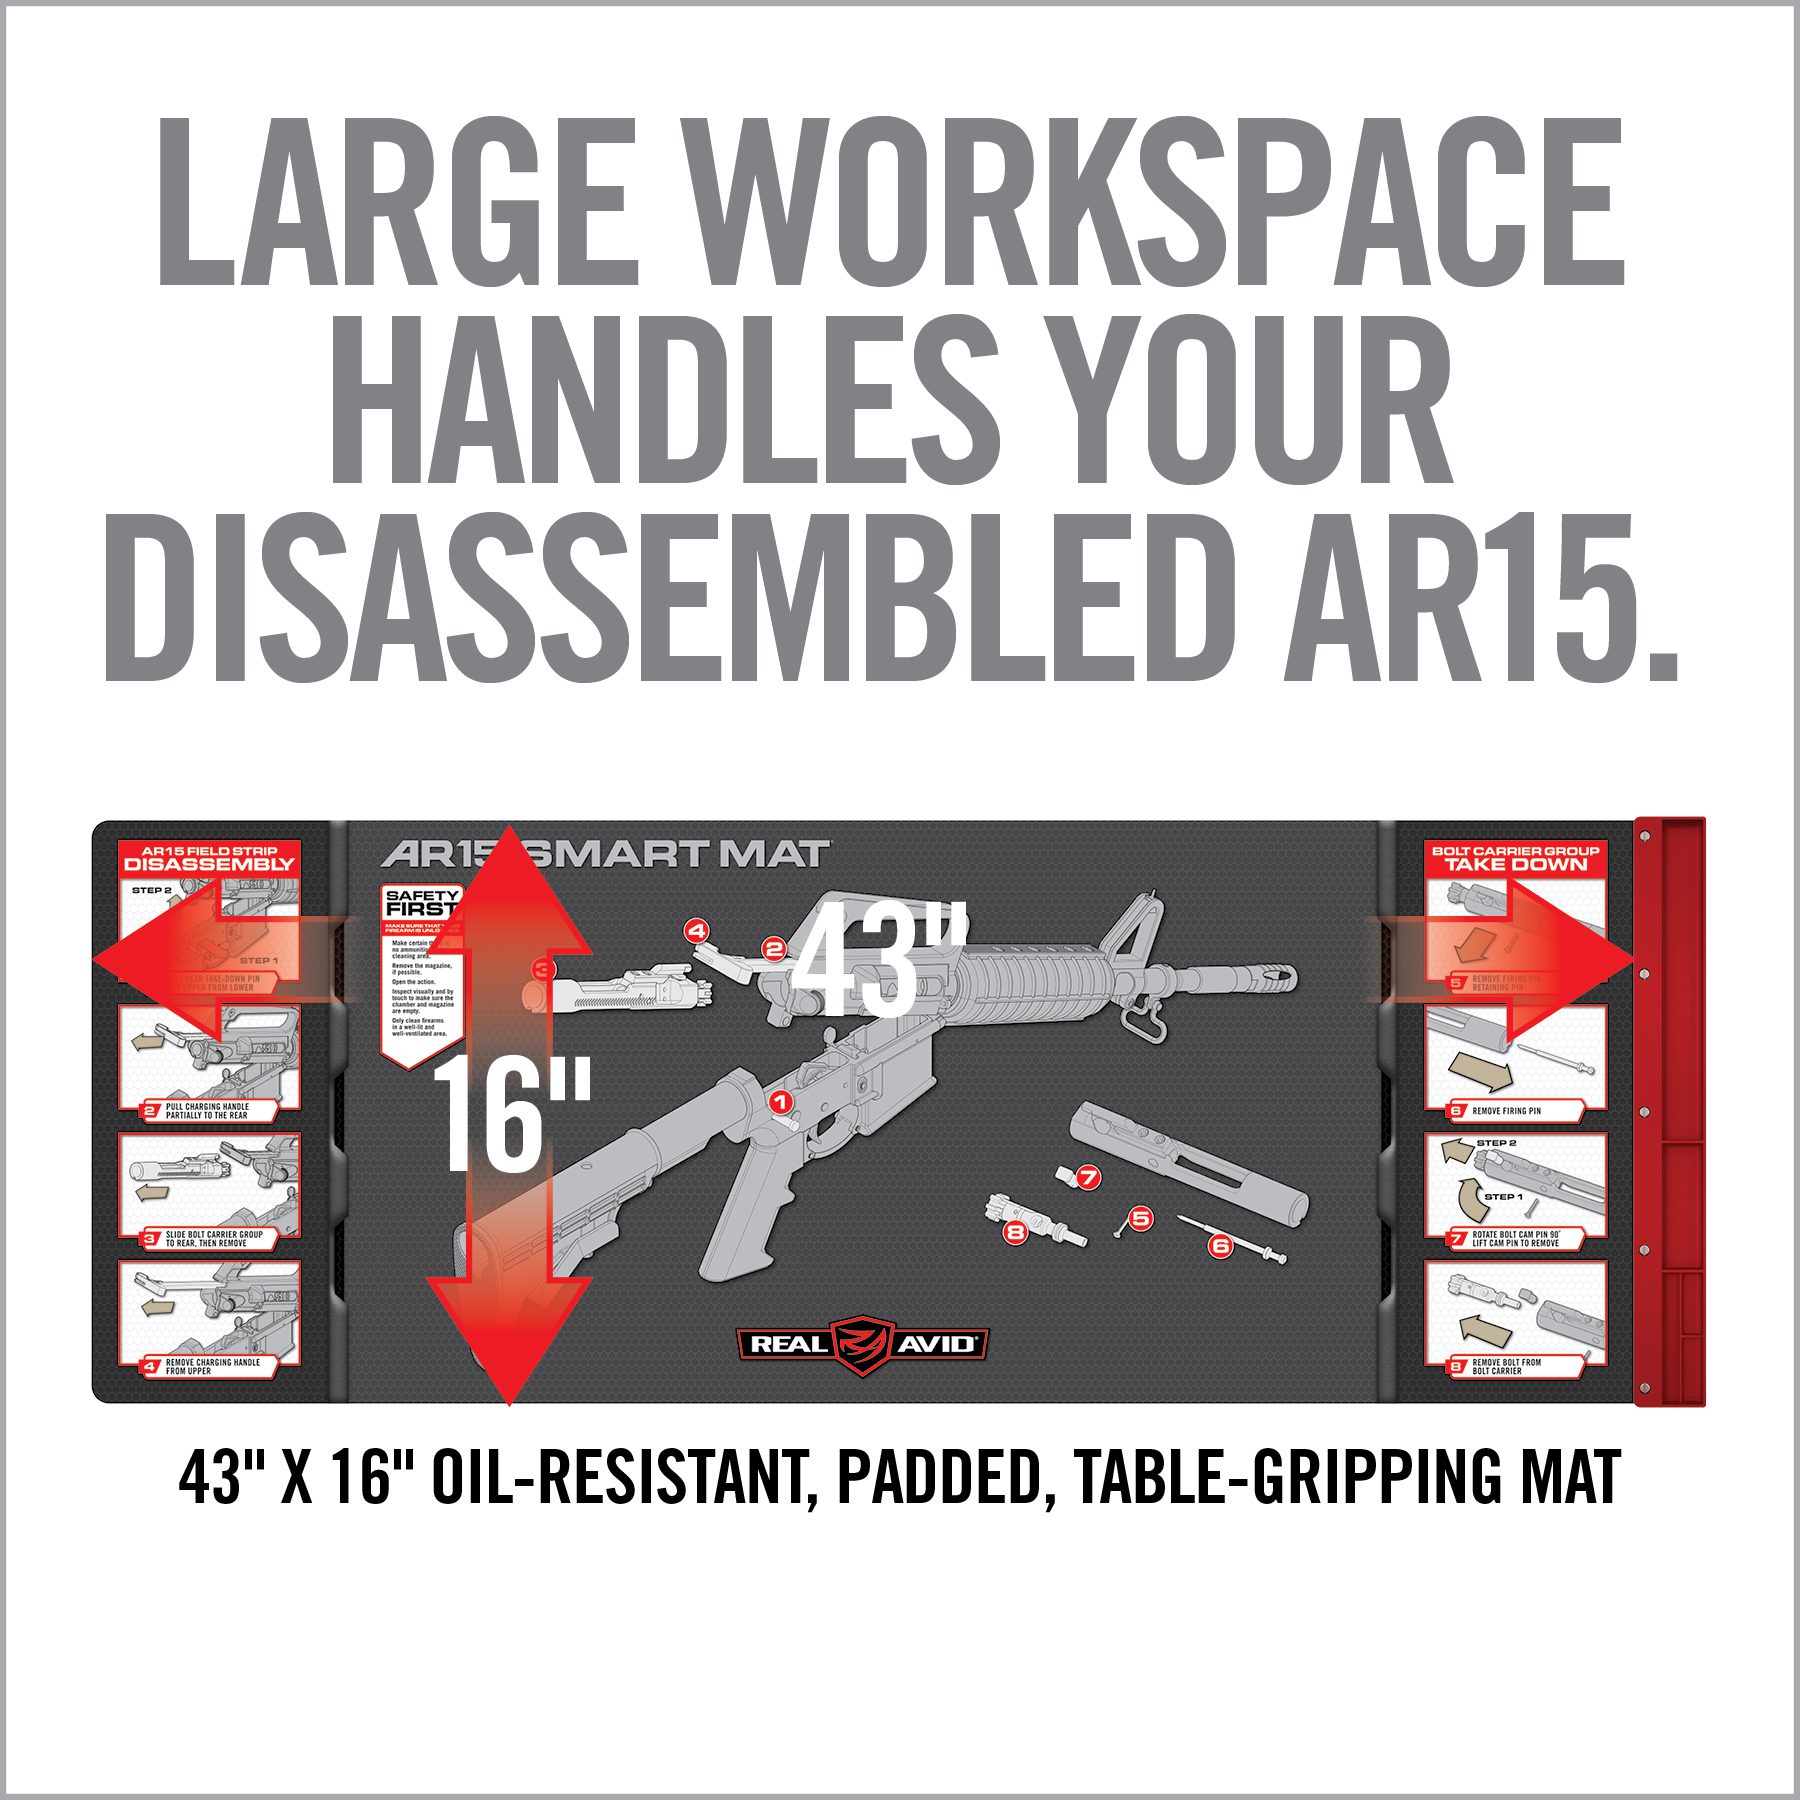 the large workspace handles your disassembled ar15